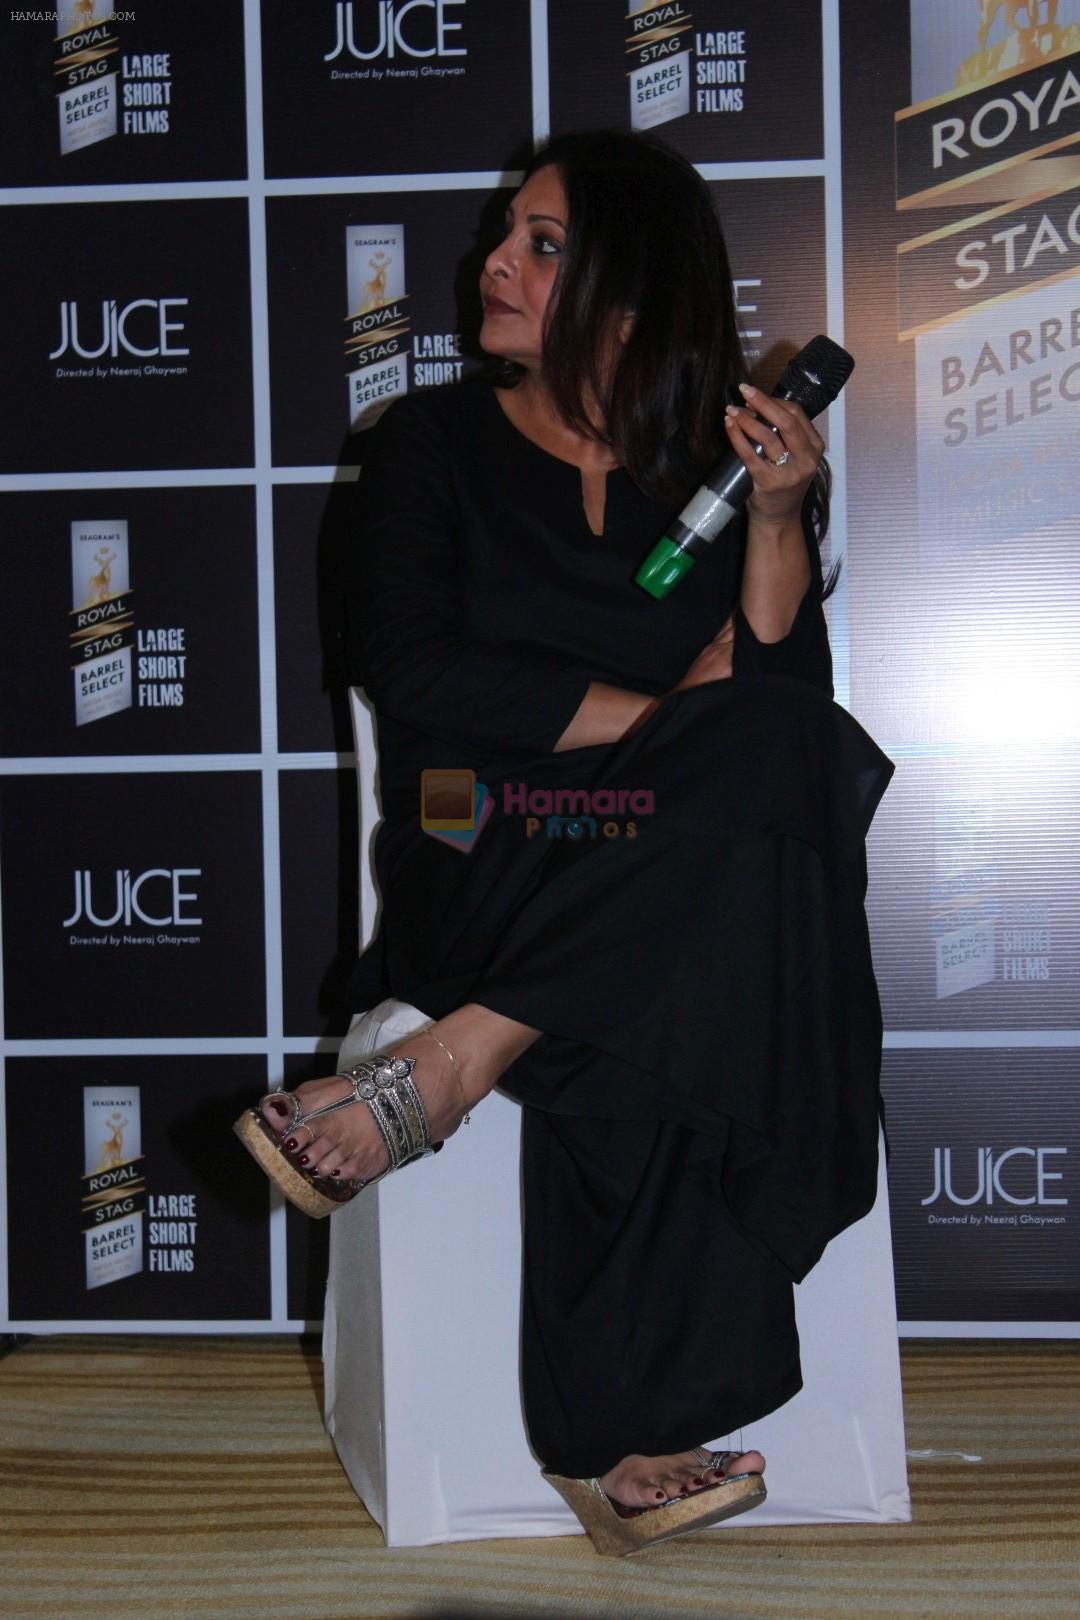 Shefali Shah at Royal Stag Barrel Select Host Special Screening Of Film Juice on 22nd Nov 2017